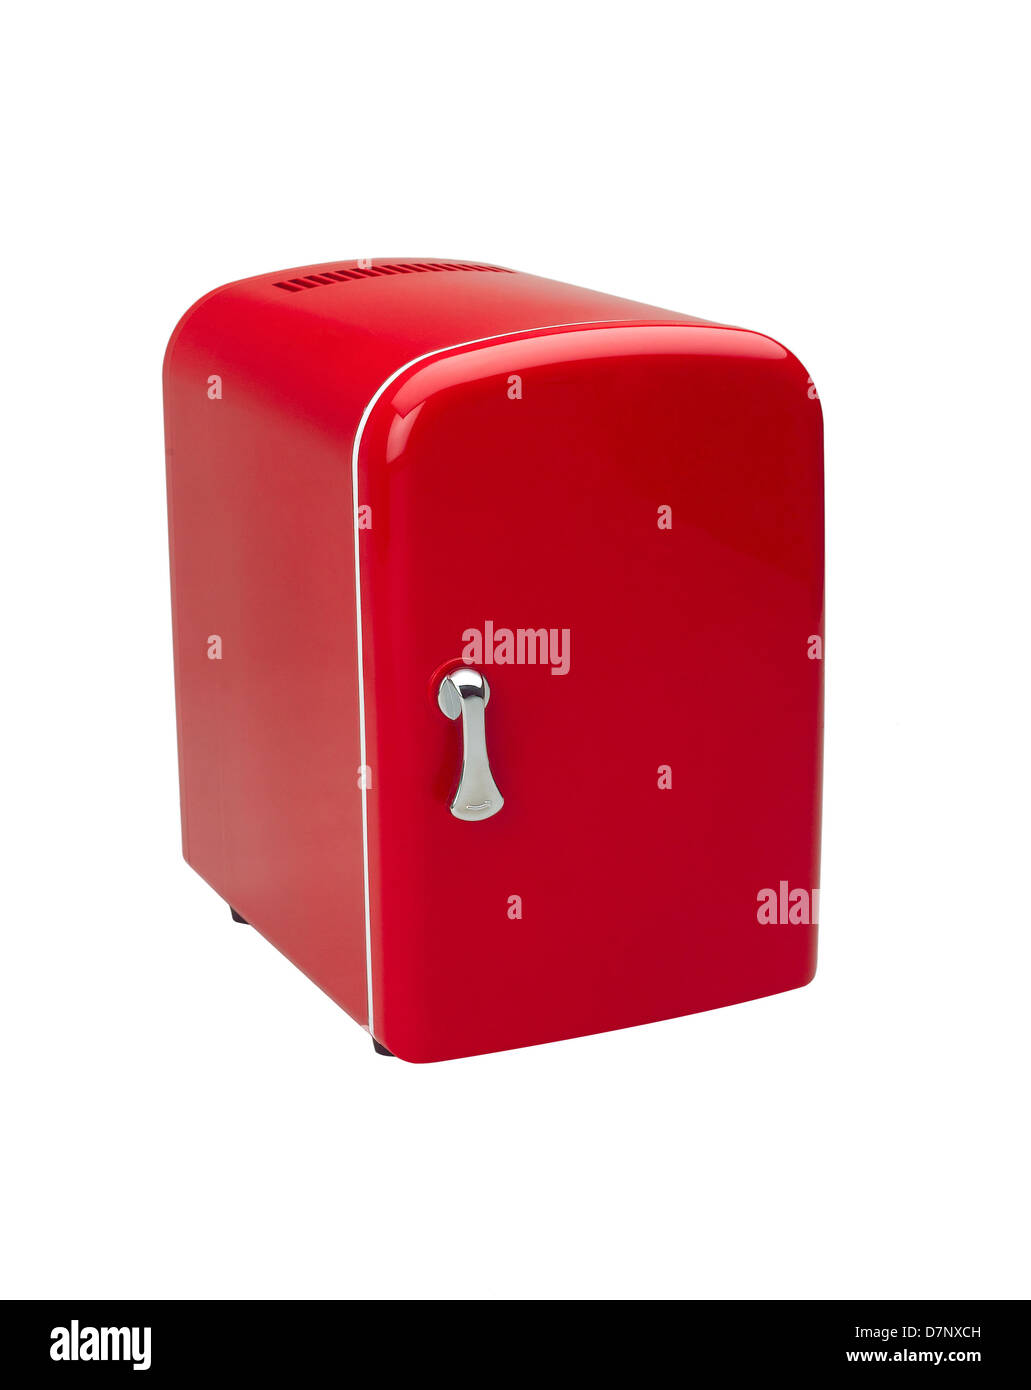 A small red refrigerator for storage small things or cosmetic Stock Photo